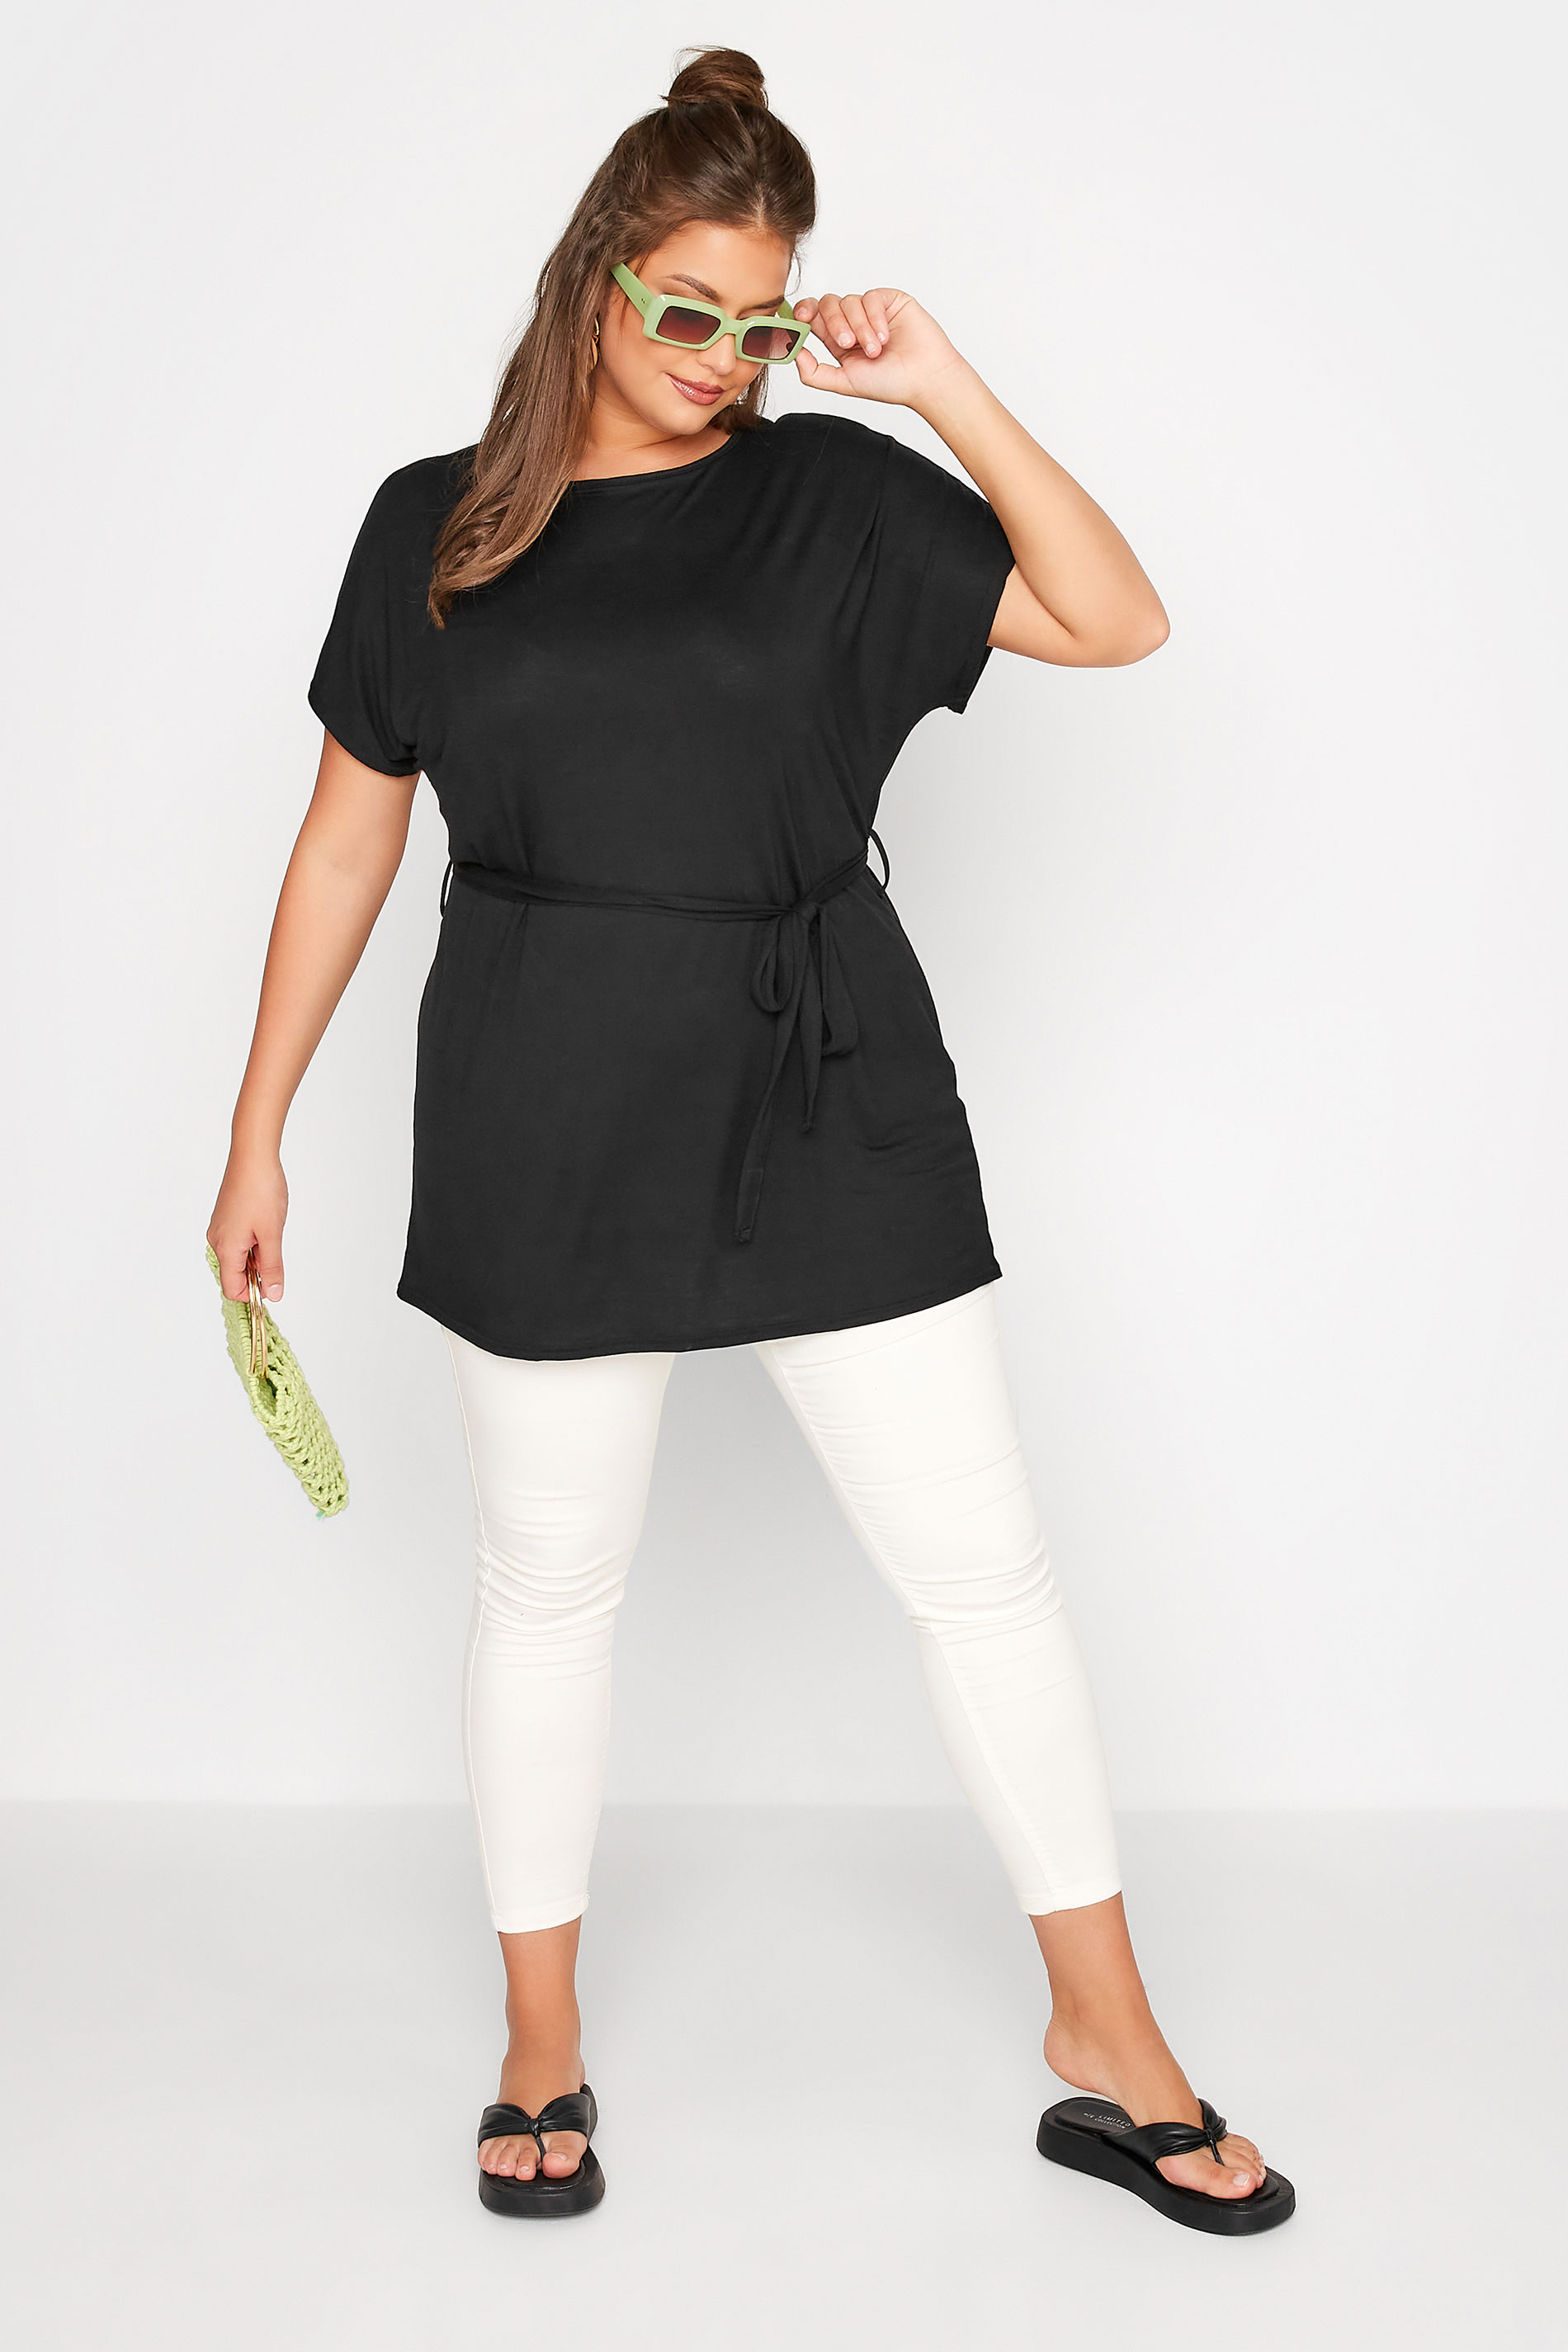 Grande taille  Tops Grande taille  Tops Casual | LIMITED COLLECTION Curve Black Waist Tie Top - KF20107